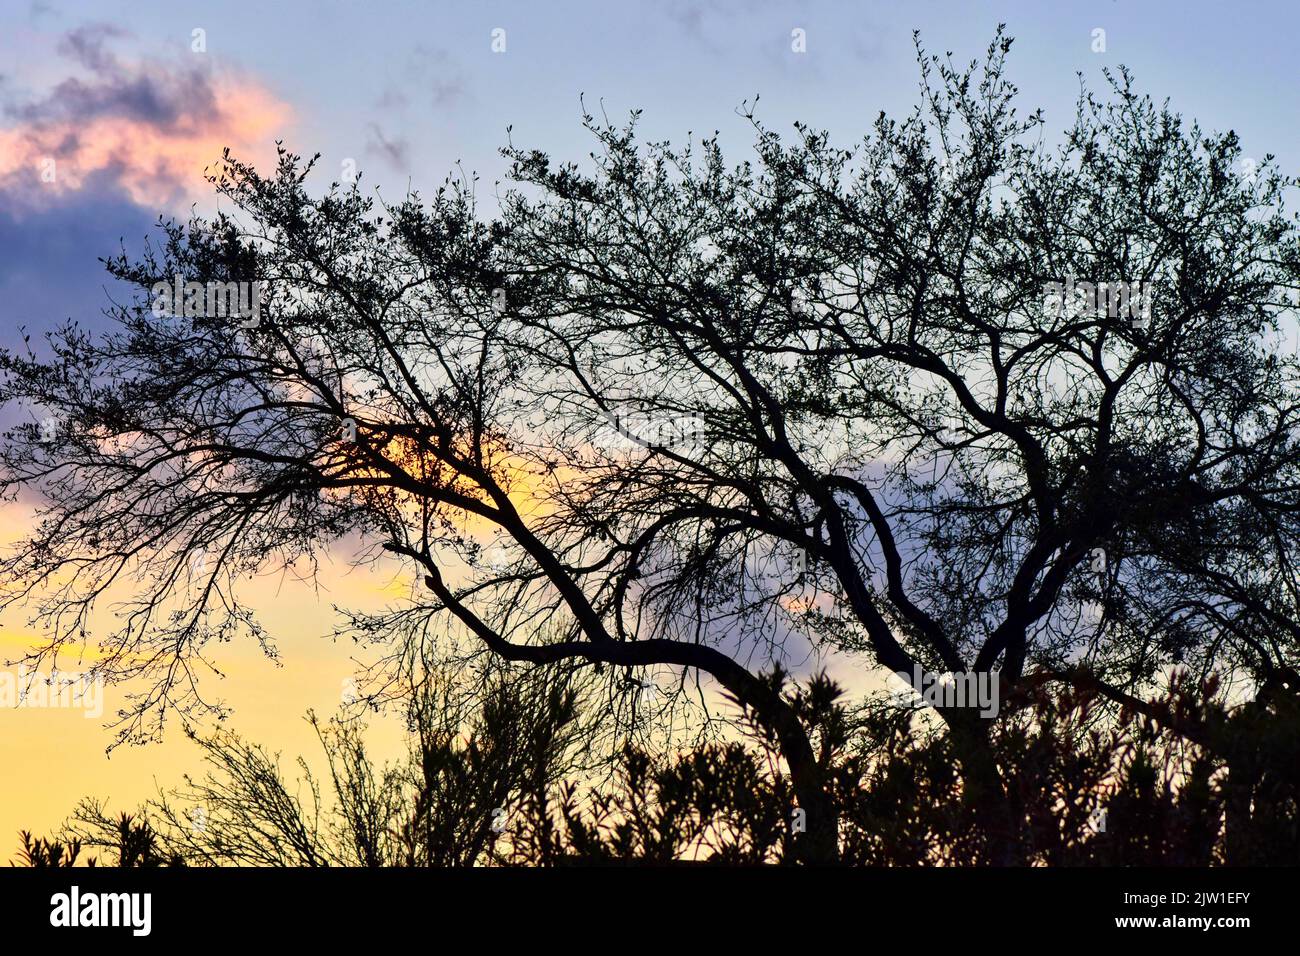 Silhouettes and shadows of spindly trees and underbrush against the backdrop of a setting sun. Stock Photo